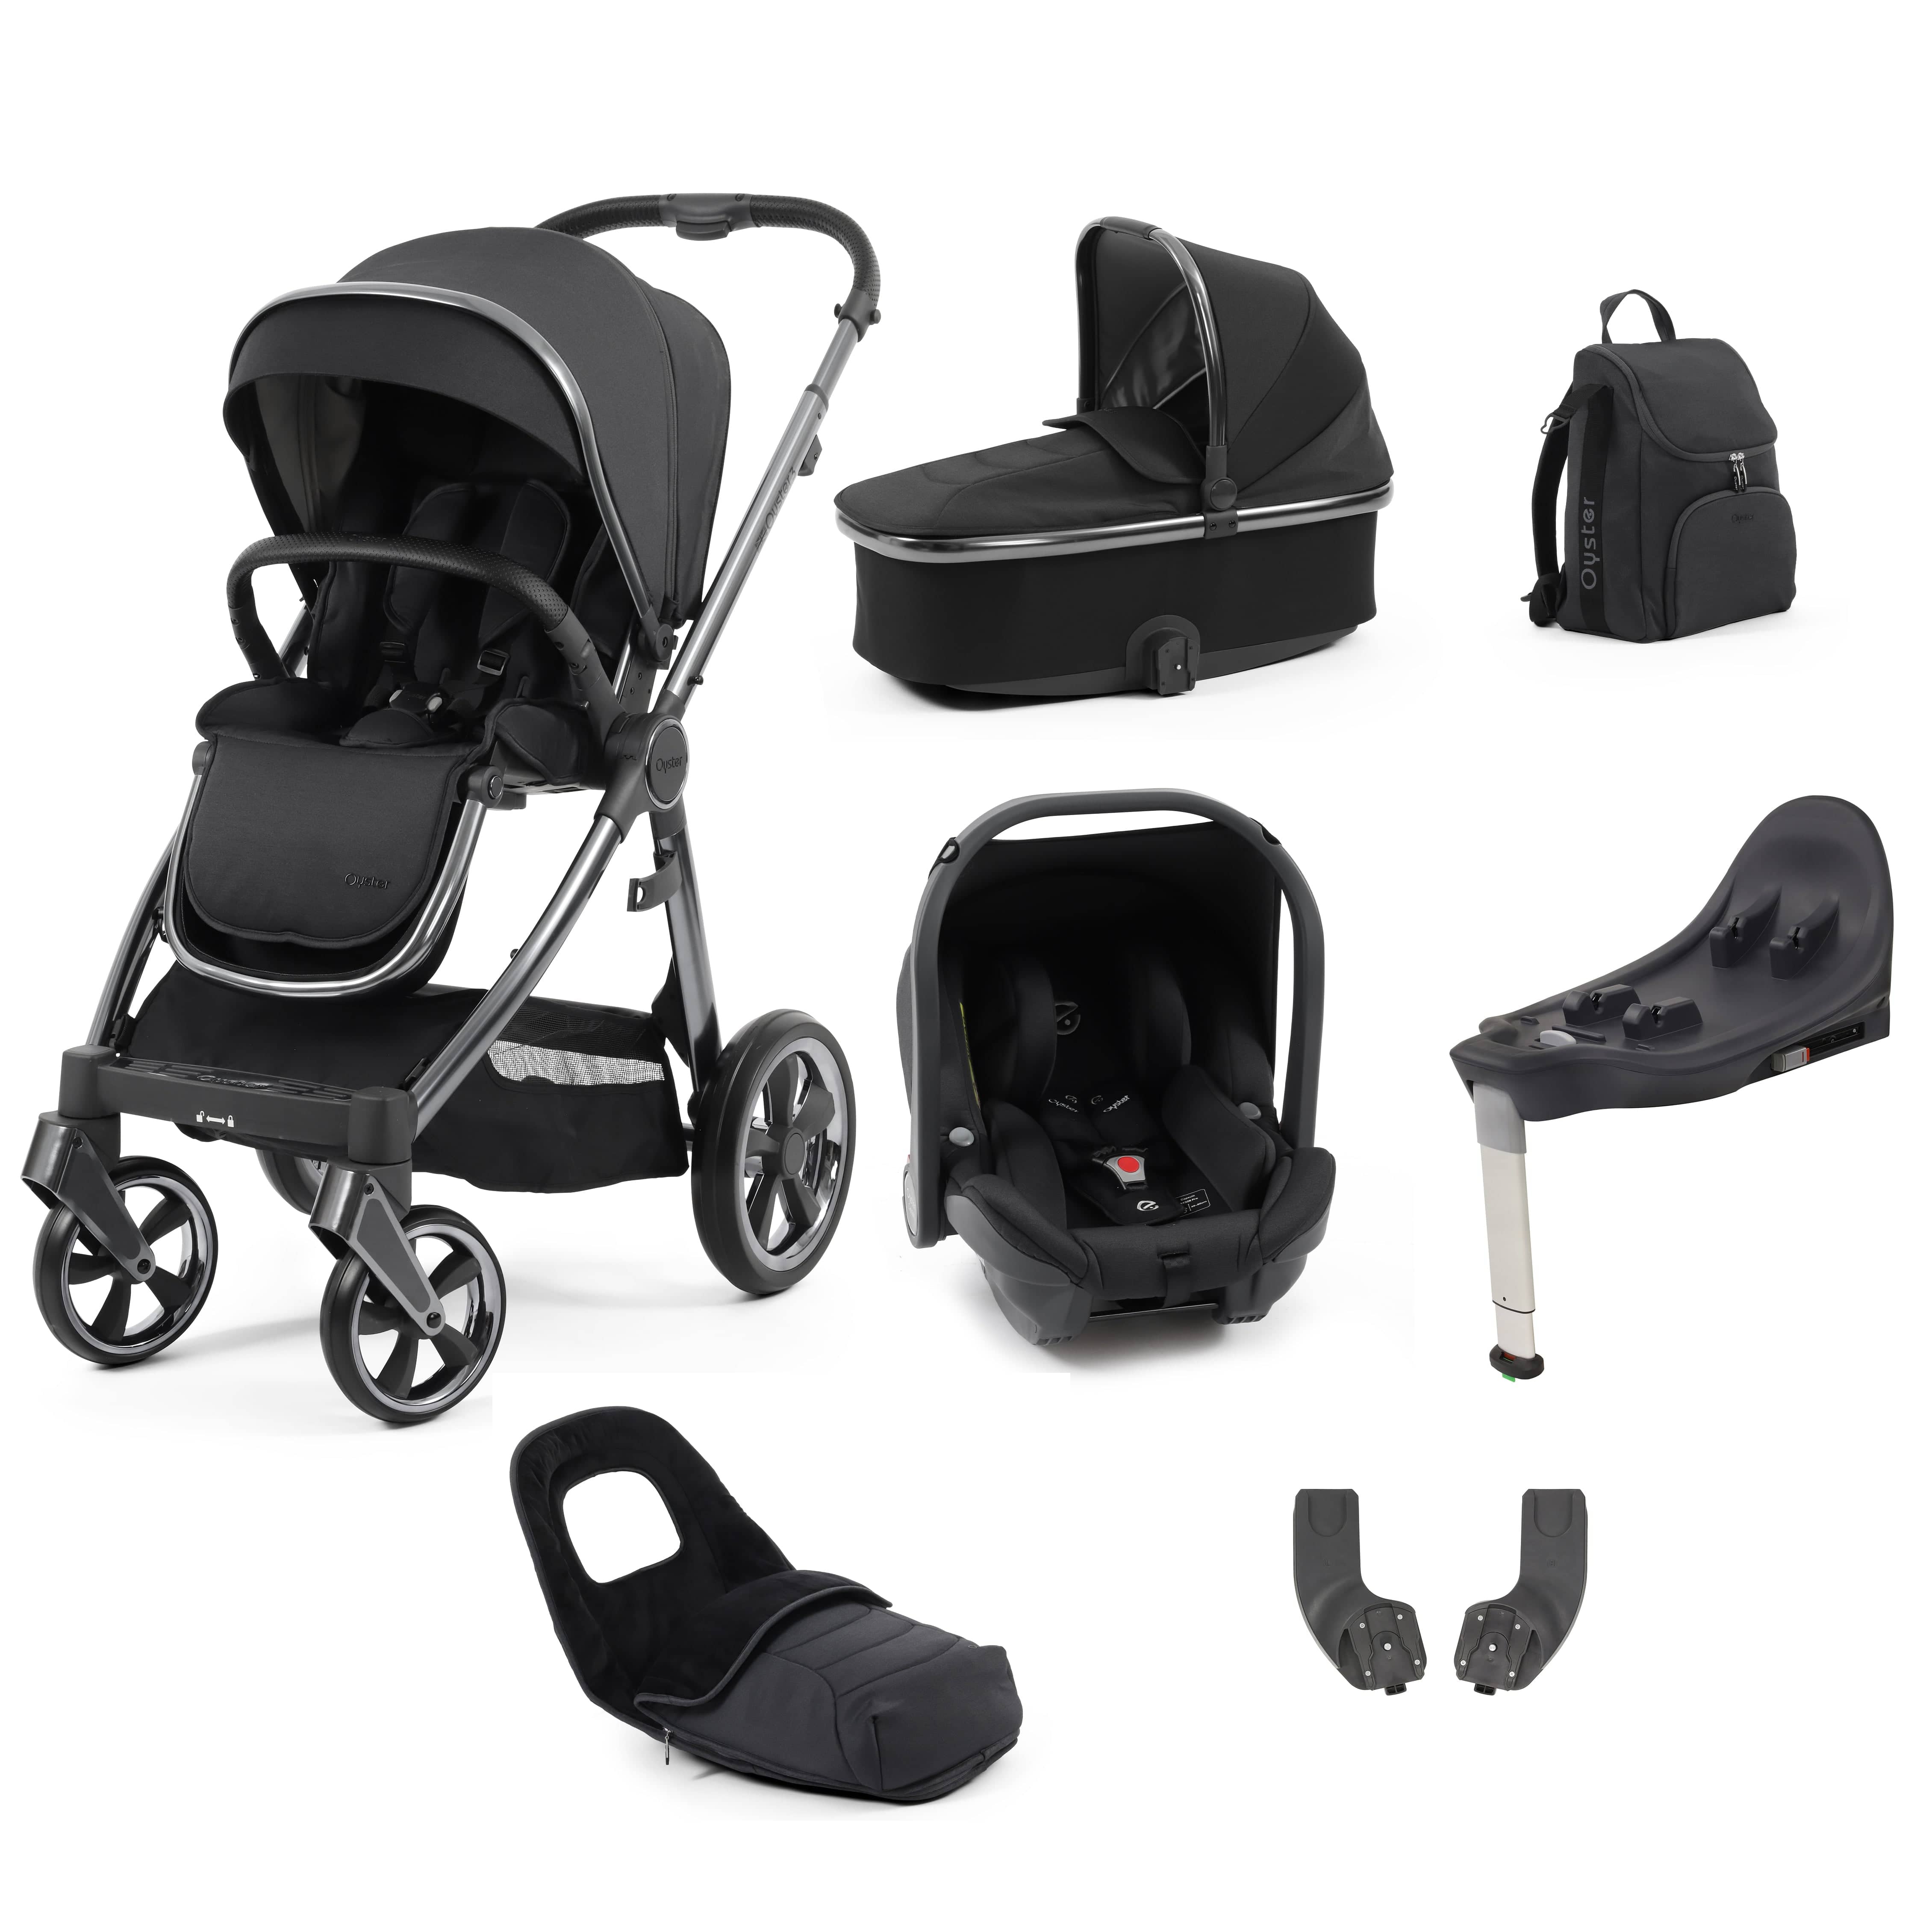 BabyStyle travel systems Babystyle Oyster 3 Luxury 7 Piece with Car Seat Bundle in Carbonite 14771-CRB